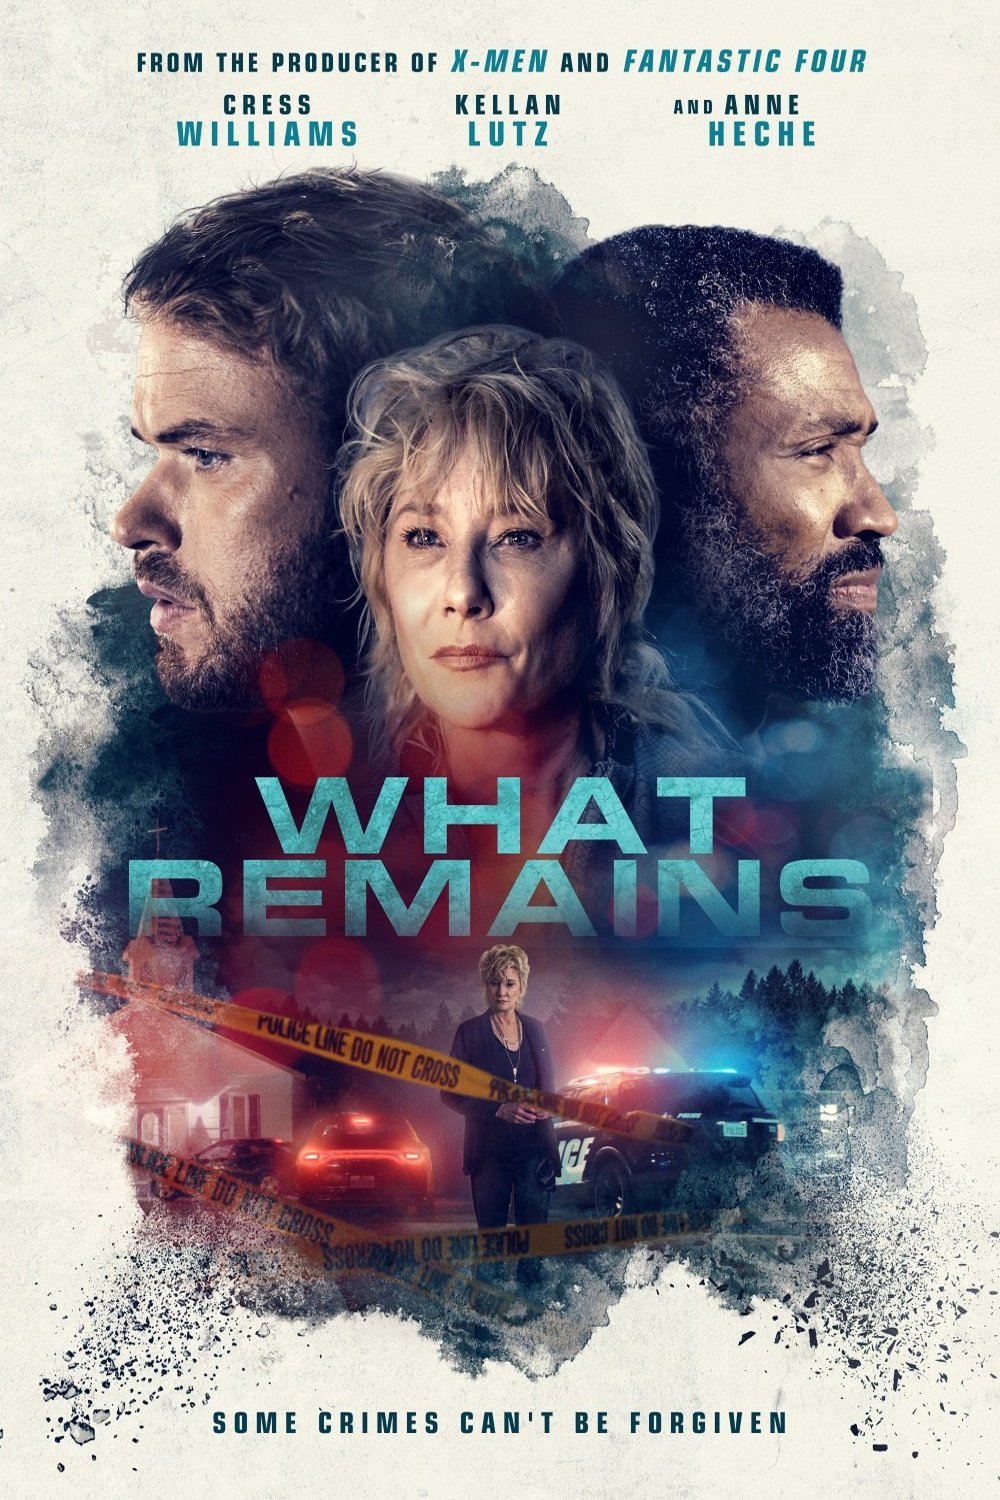 Poster of the movie What Remains